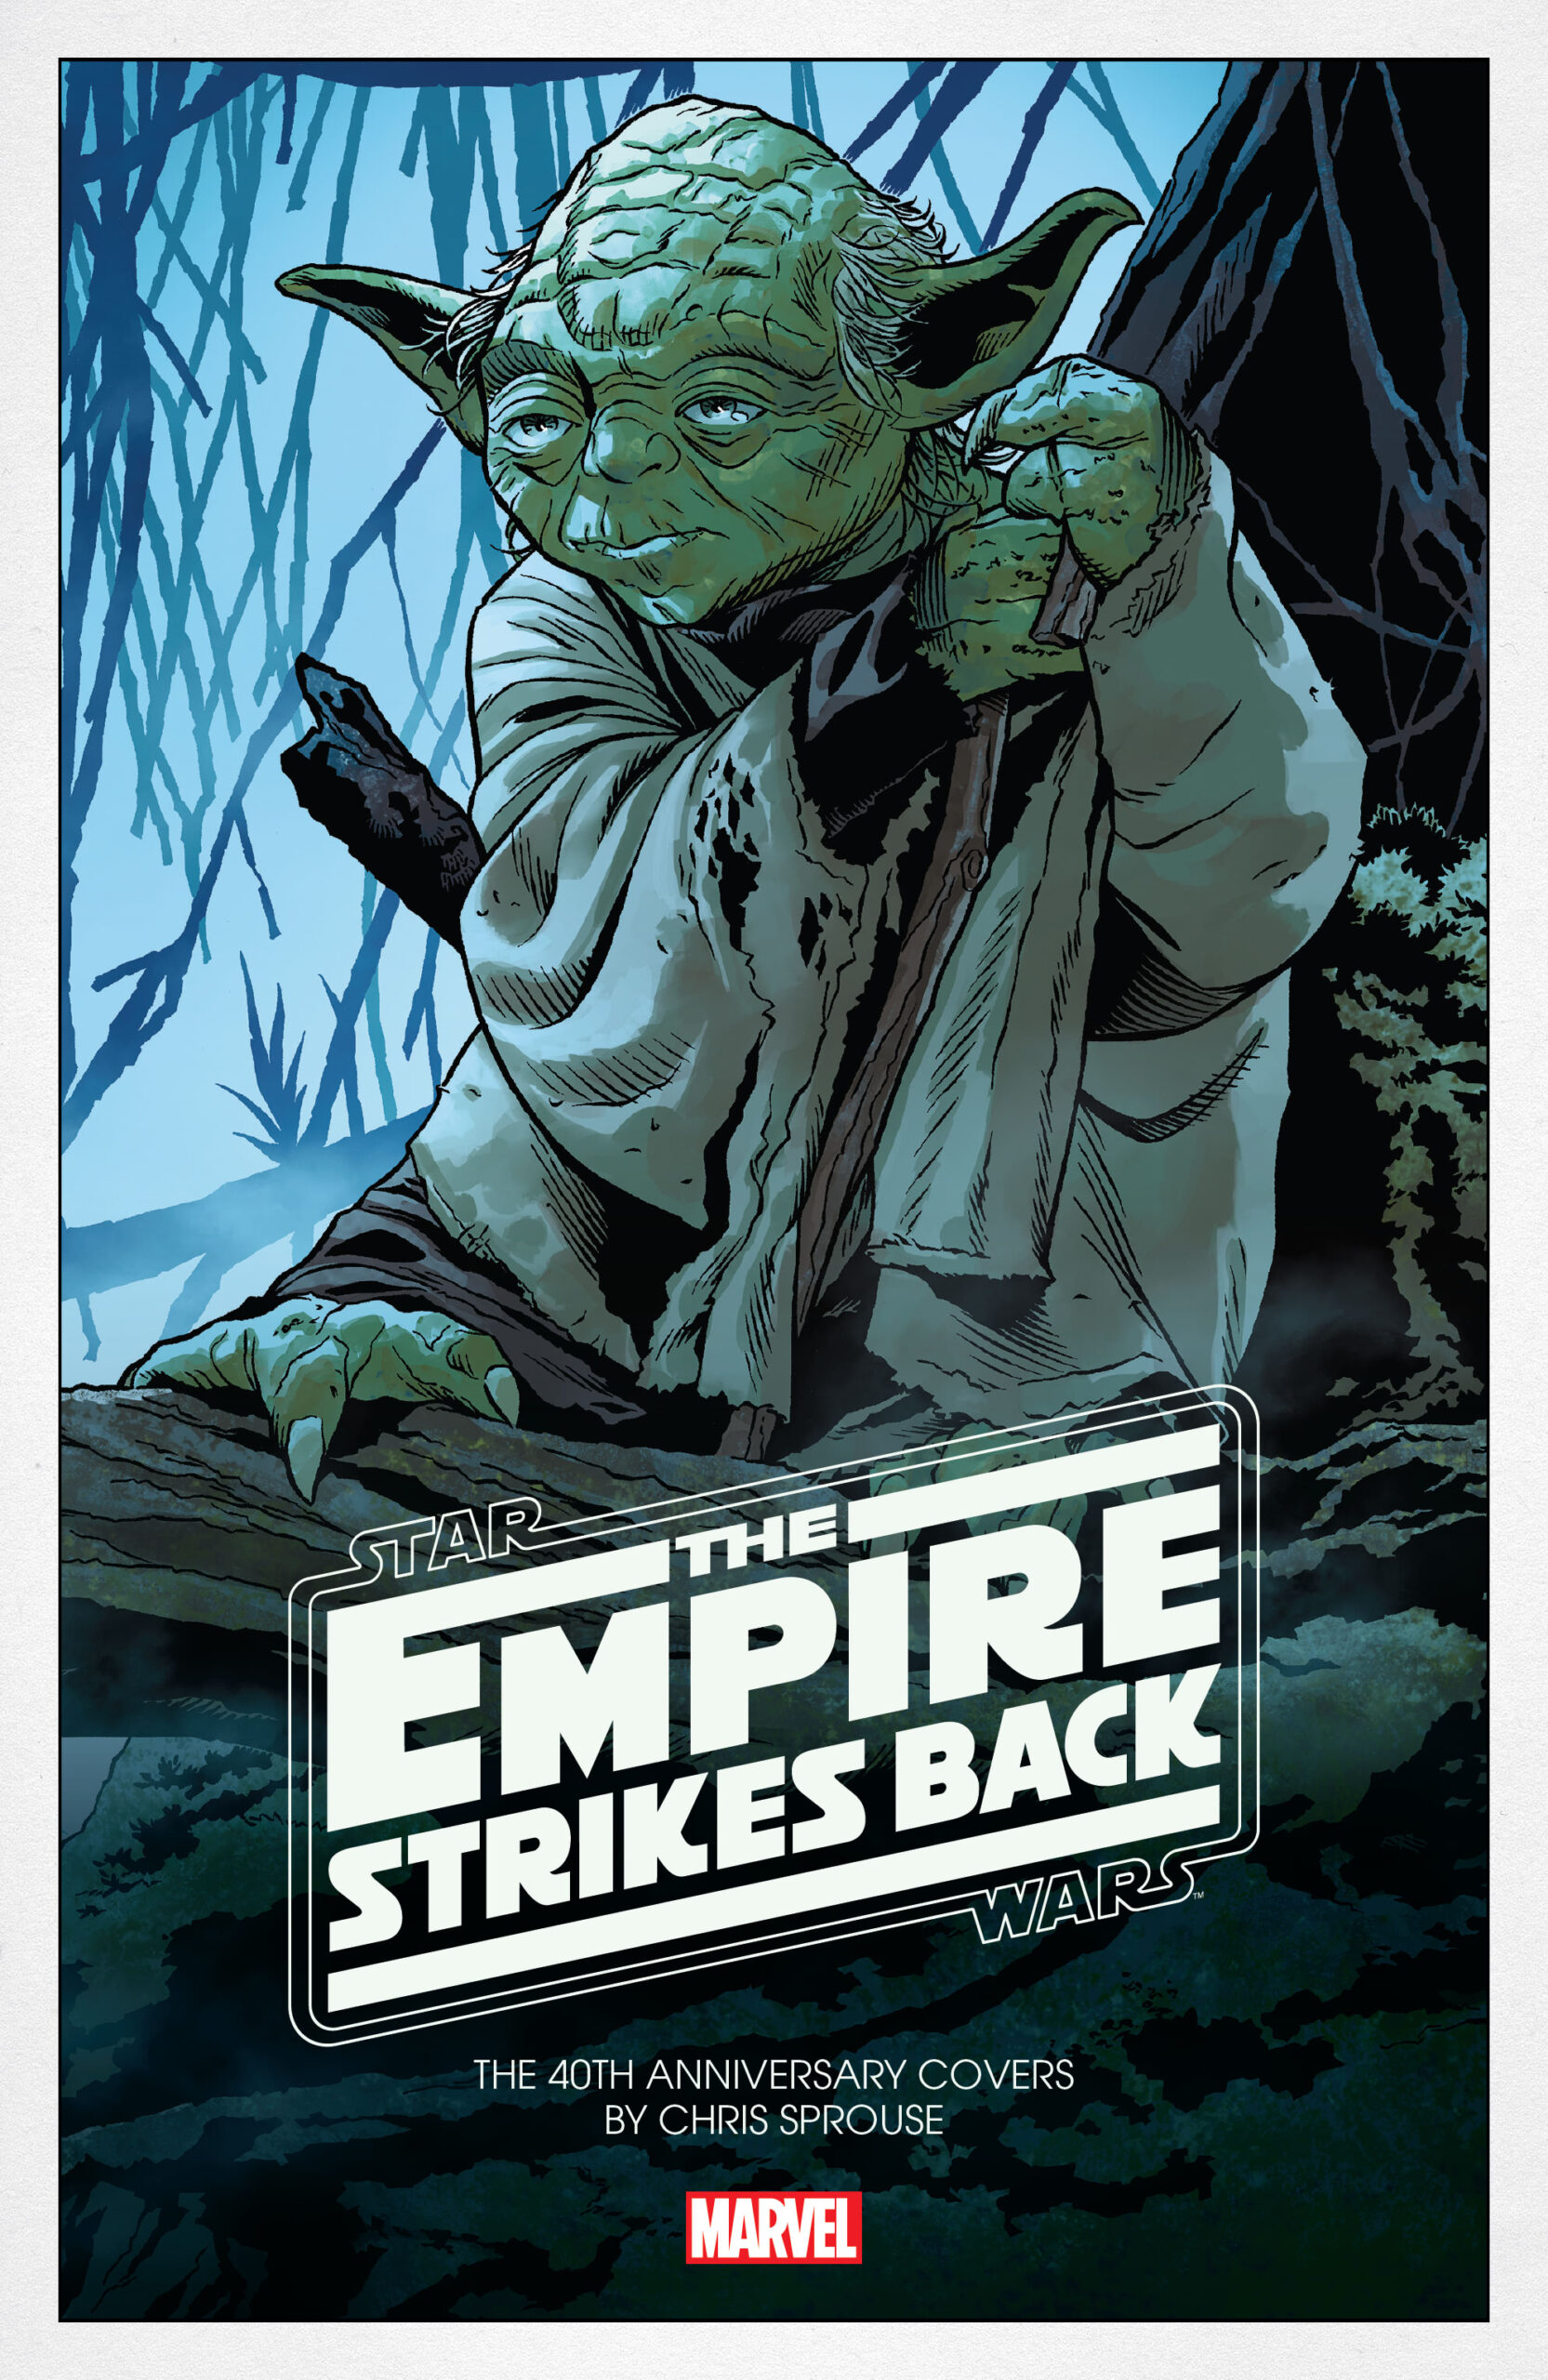 Star Wars – Empire Strikes Back – The 40th Anniversary Covers